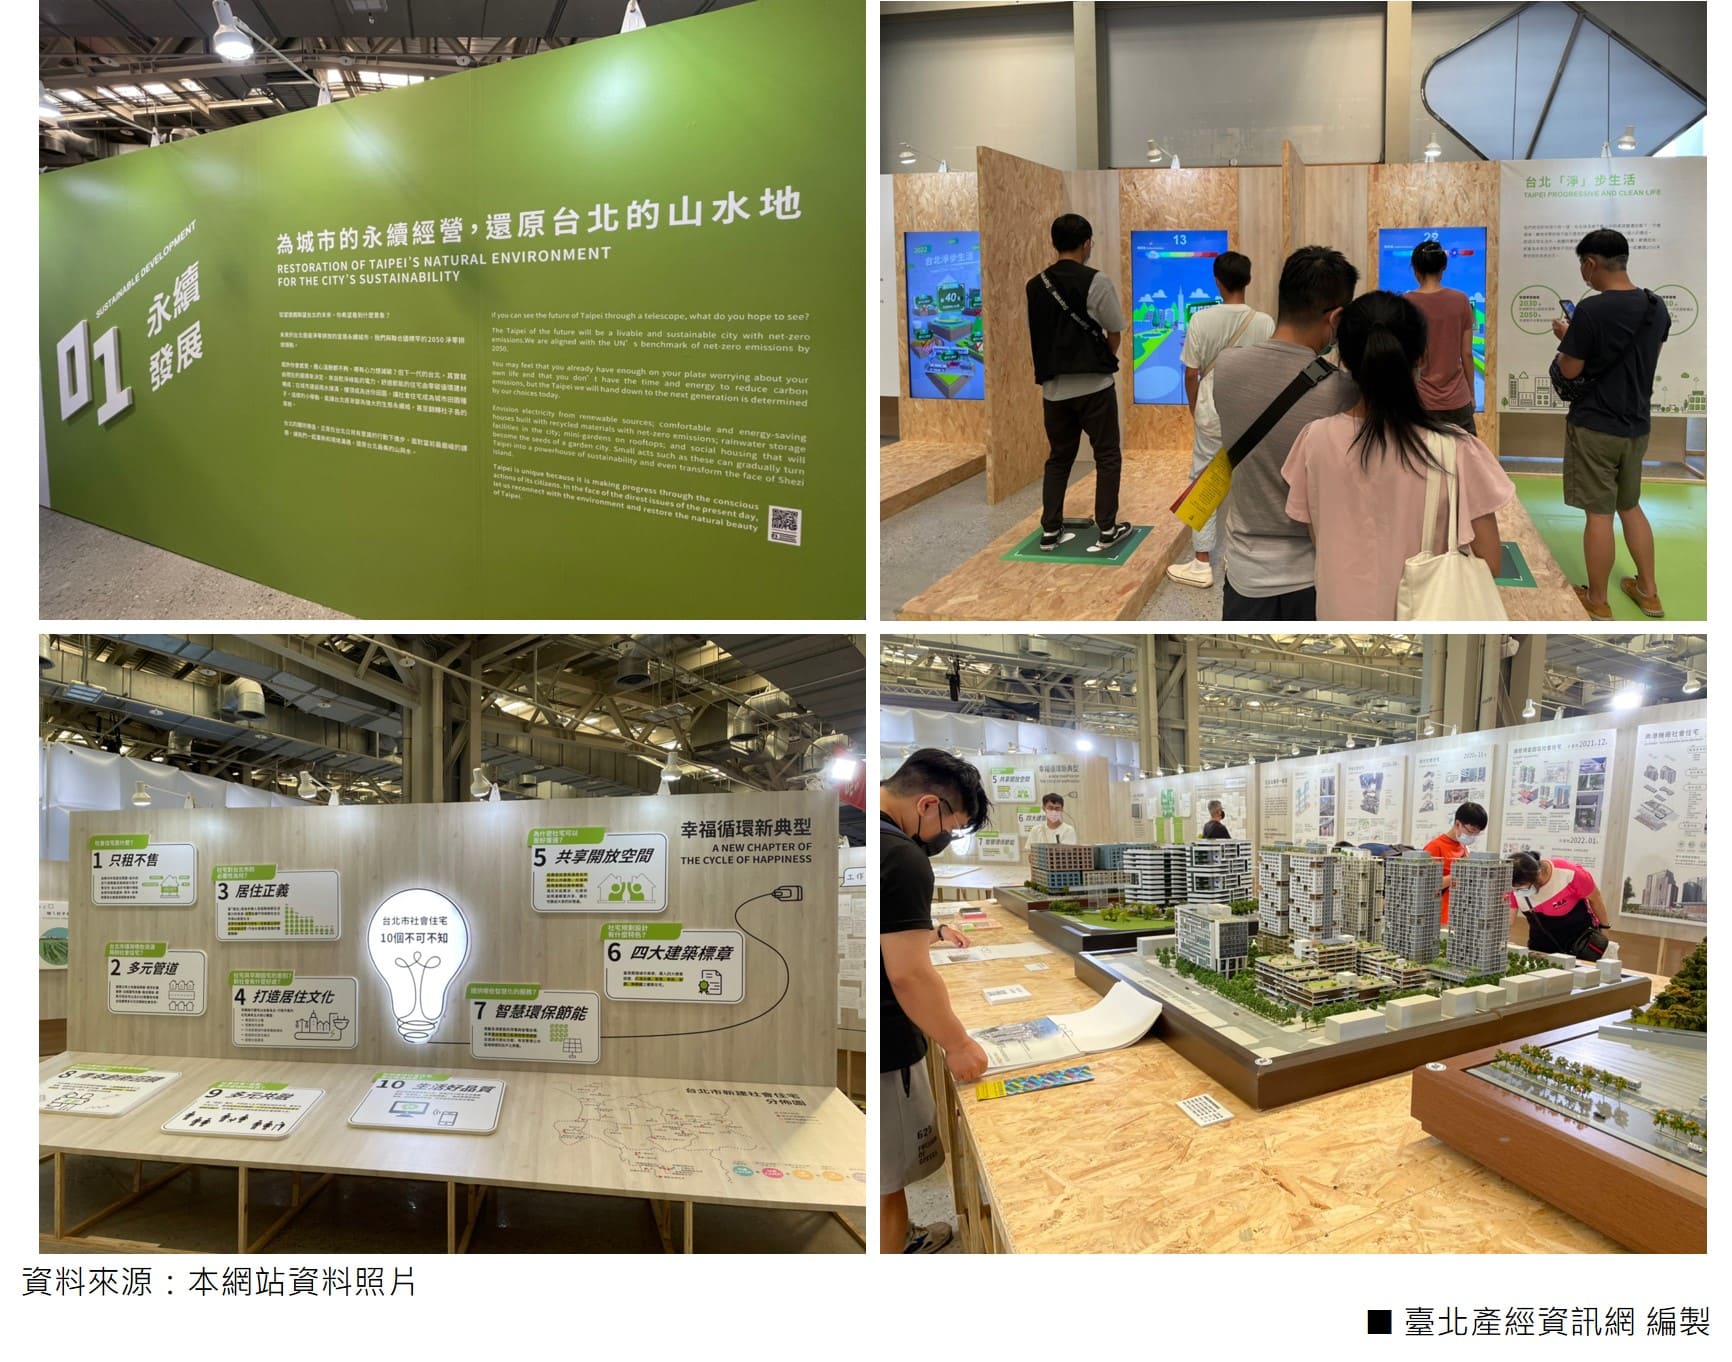 Display of achievements in the “Sustainable Development” exhibition zone